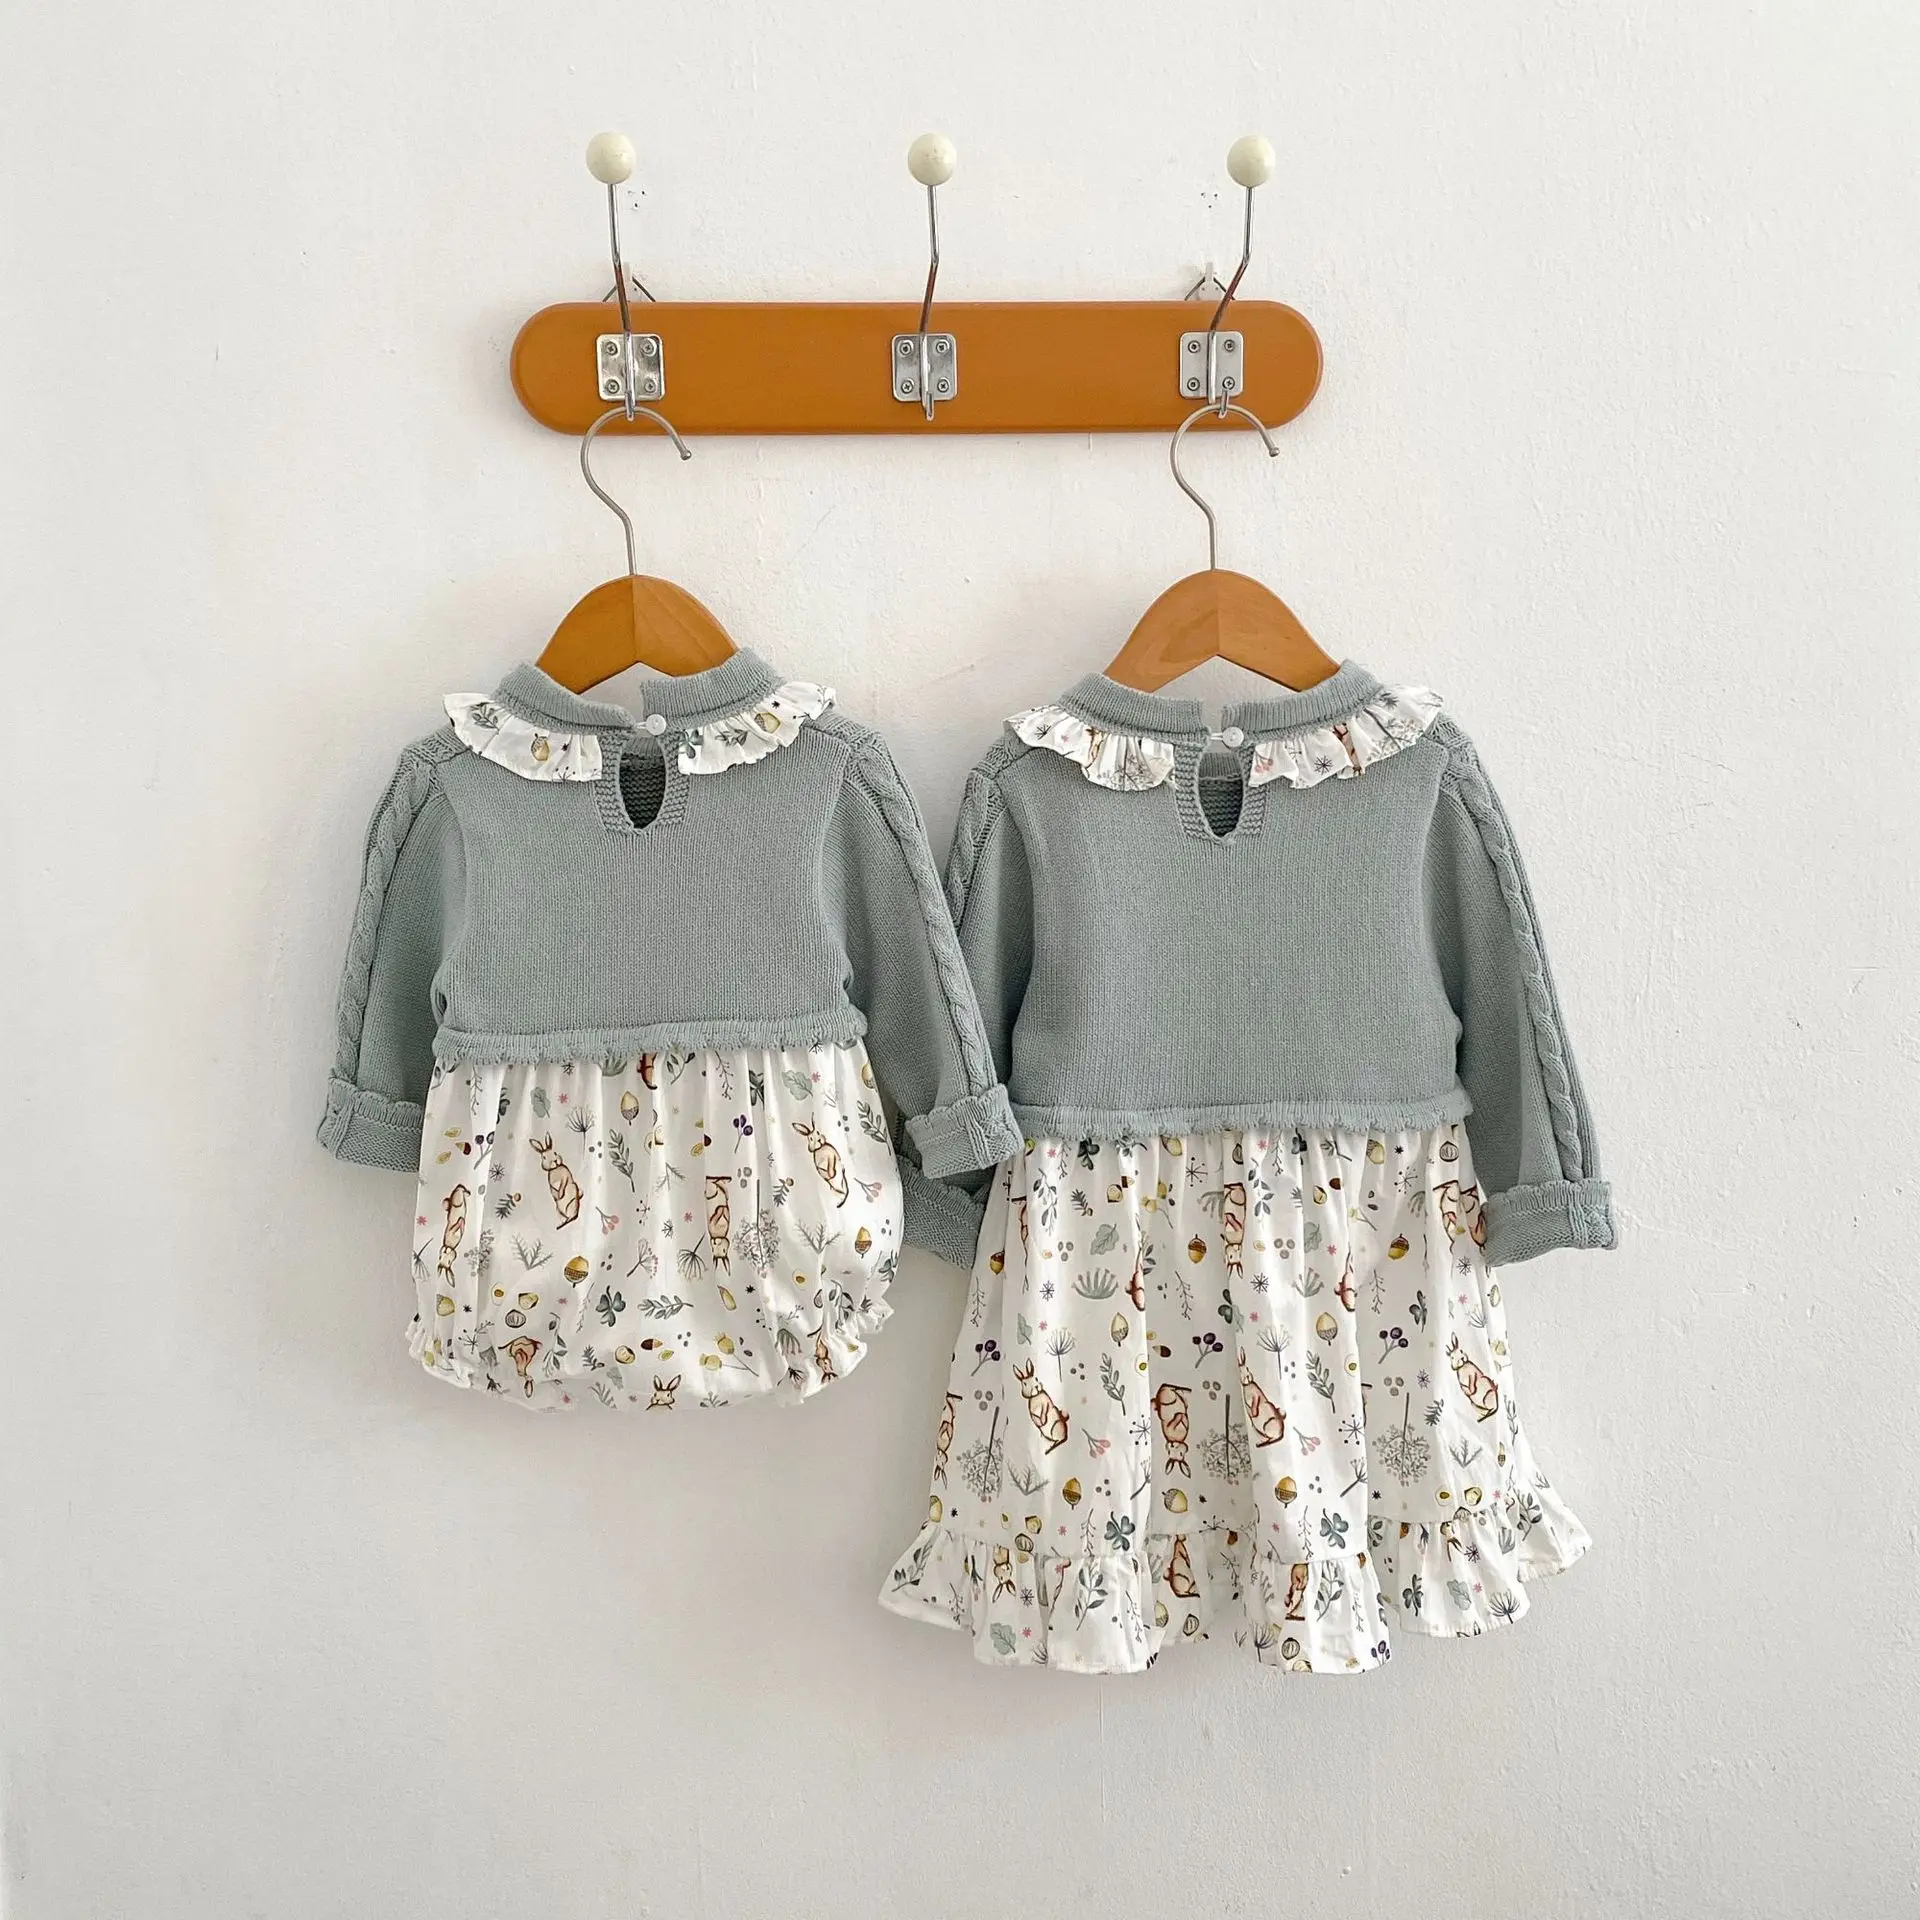 Engepapa Autumn Sisters Knitted Patchwork Printed Infant Romper Dress Fashion Baby Girl Clothes